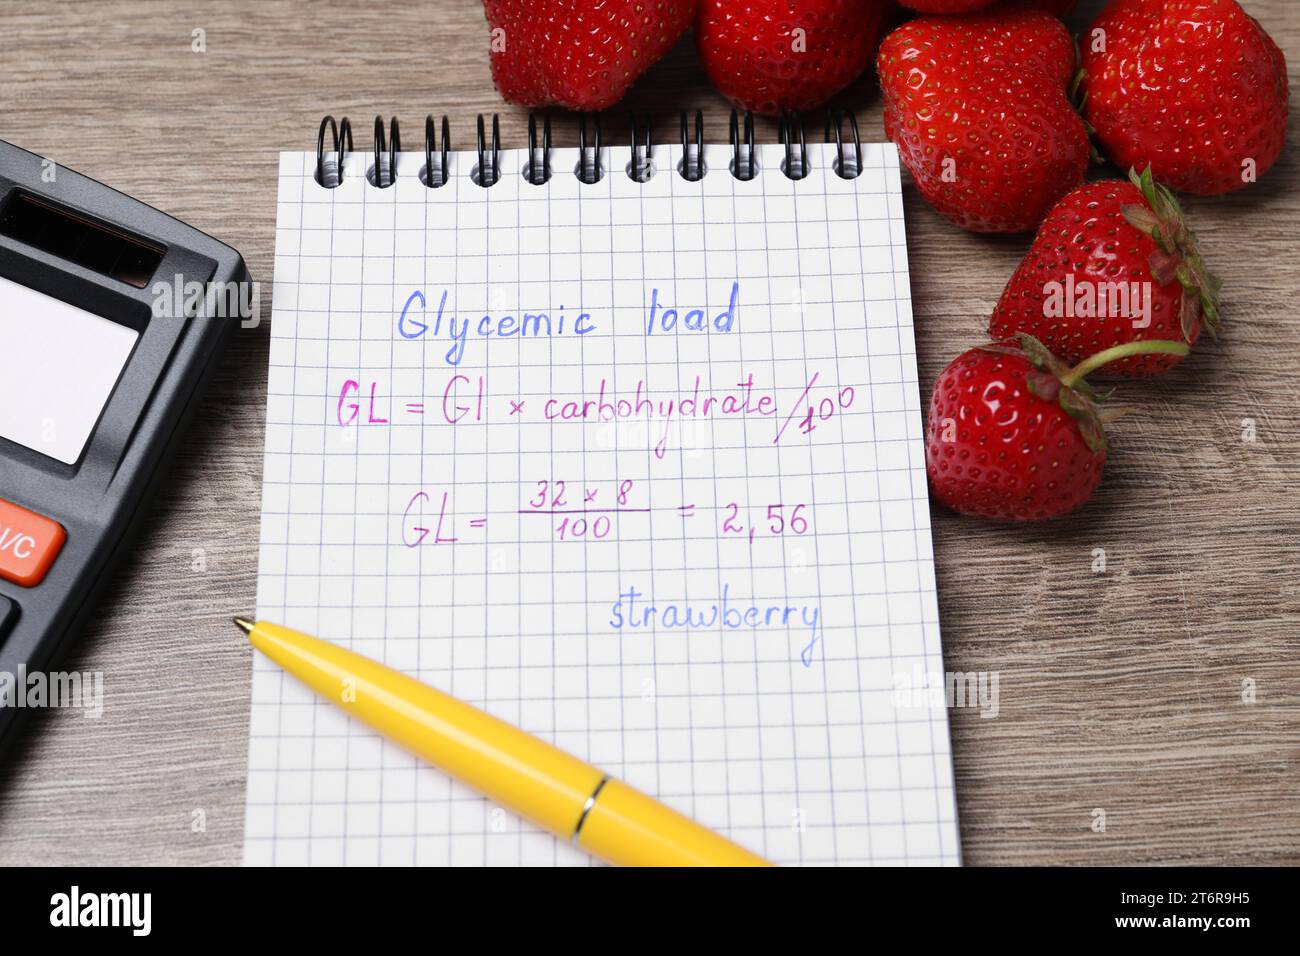 Notebook with calculated glycemic load for strawberry, pen and fresh berries on wooden table, closeup Stock Photo